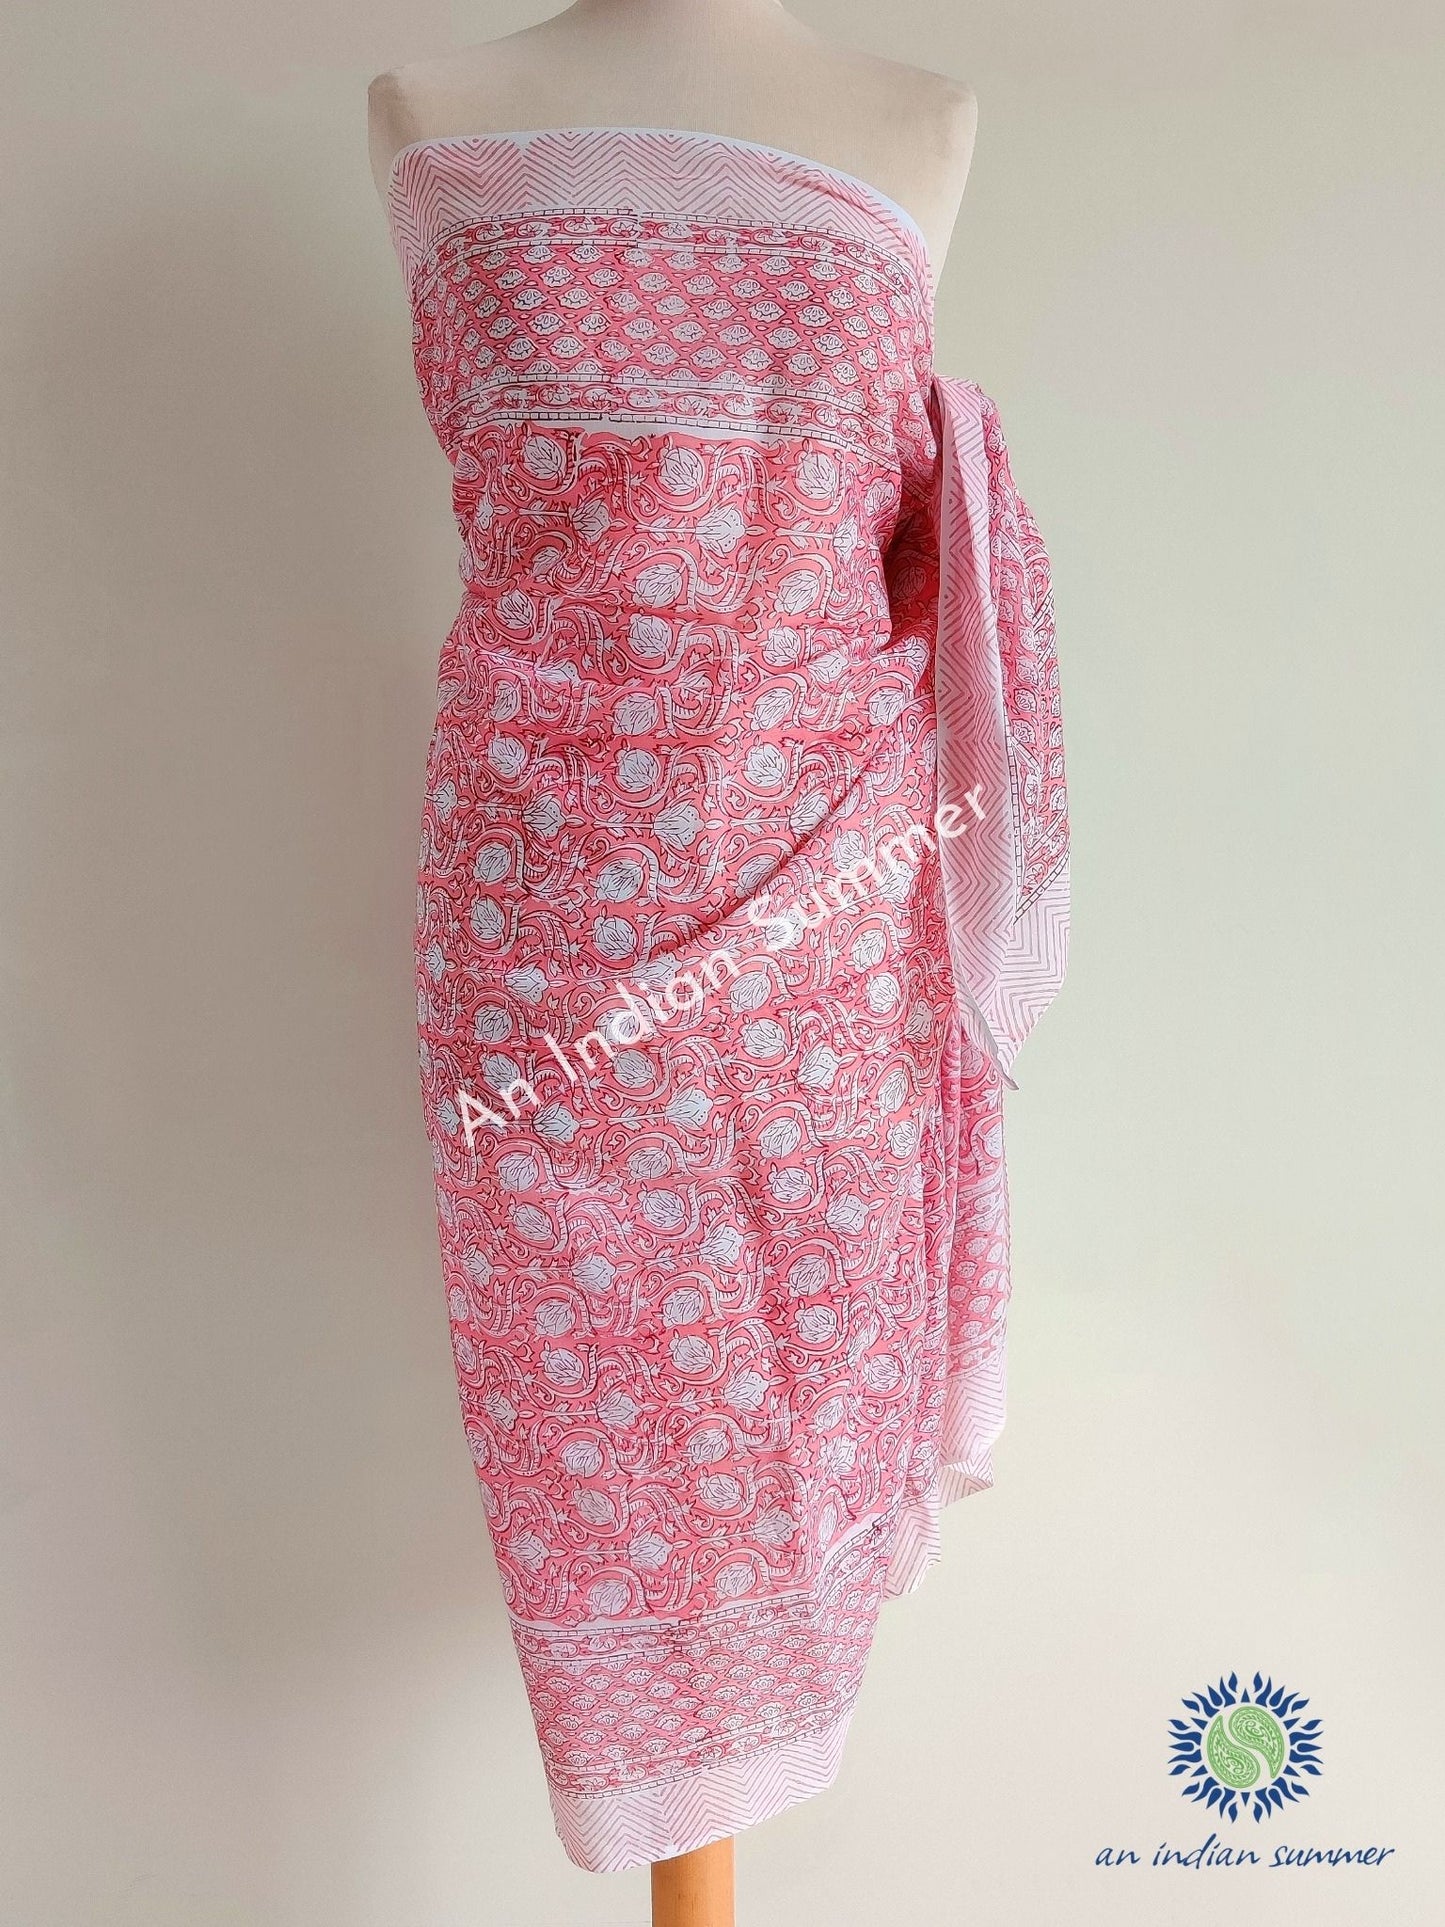 Darling Buds of May Sarong Pareo | Pink | Hand Block Printed | Soft Cotton Voile | An Indian Summer | Seasonless Timeless Sustainable Ethical Authentic Artisan Conscious Clothing Lifestyle Brand